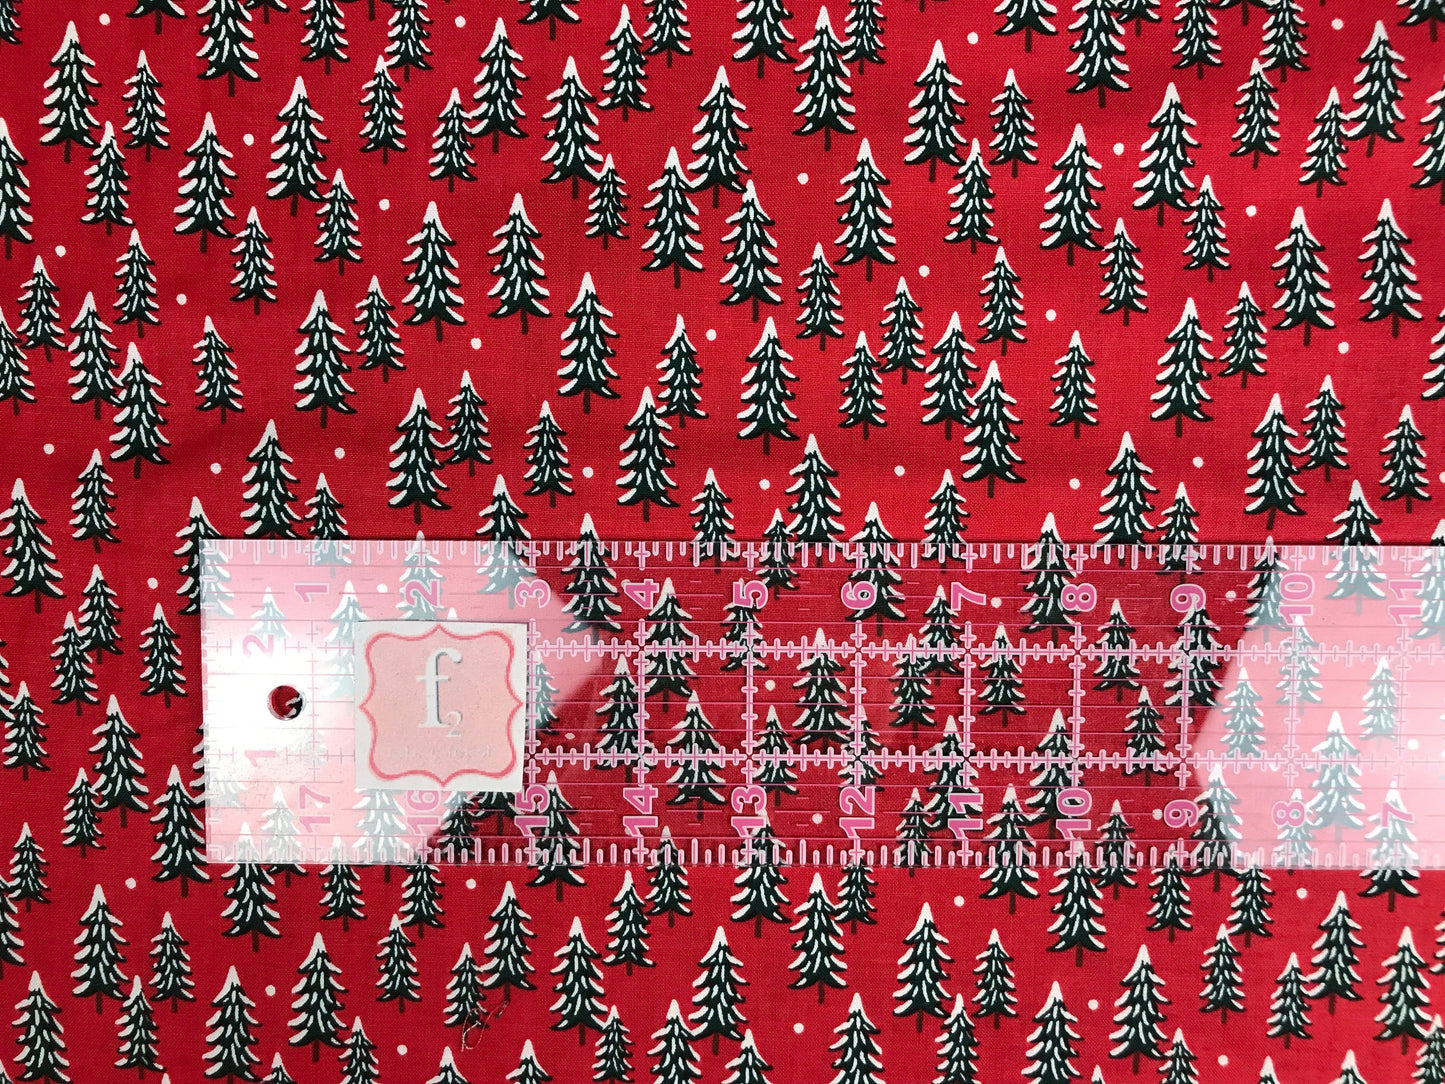 Rifle Paper Co - Cotton + Steel - Holiday Classics - Fur Trees Red Silver Metallic